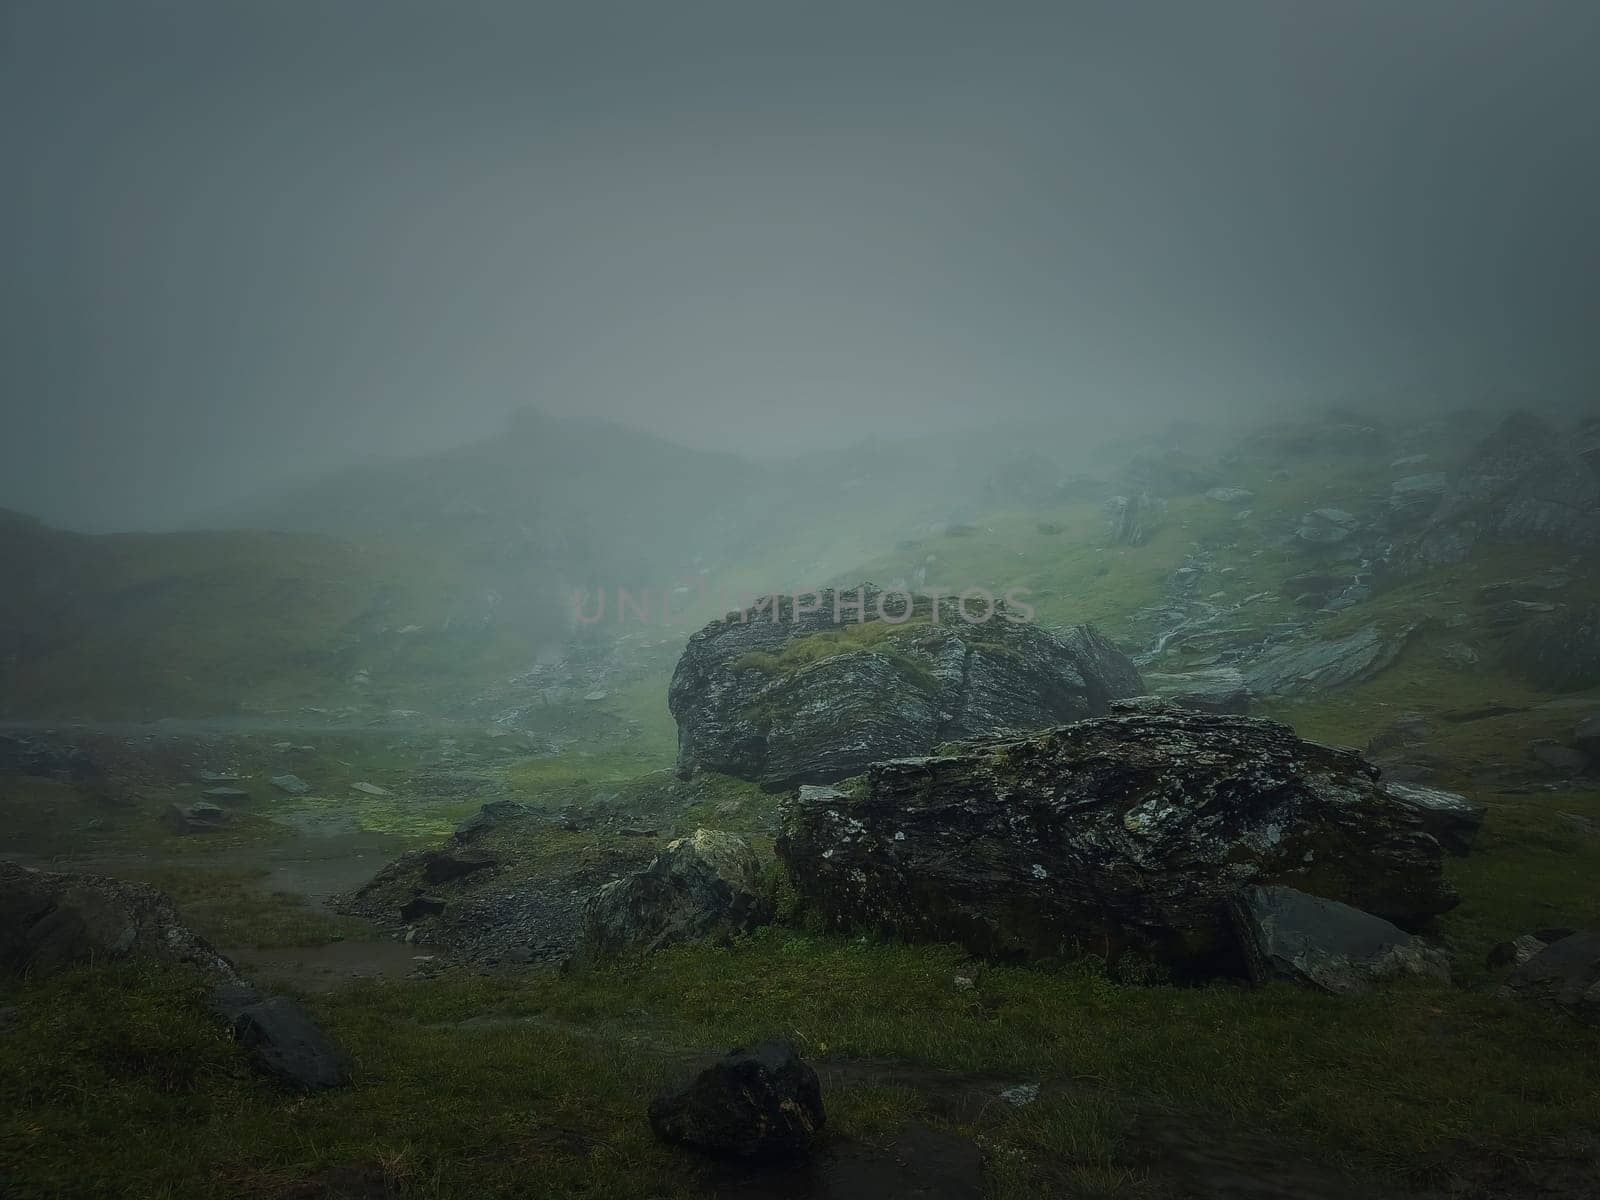 Big mountain rocks and boulders seen through the dense mist. Moody hiking scene with rainy weather by psychoshadow